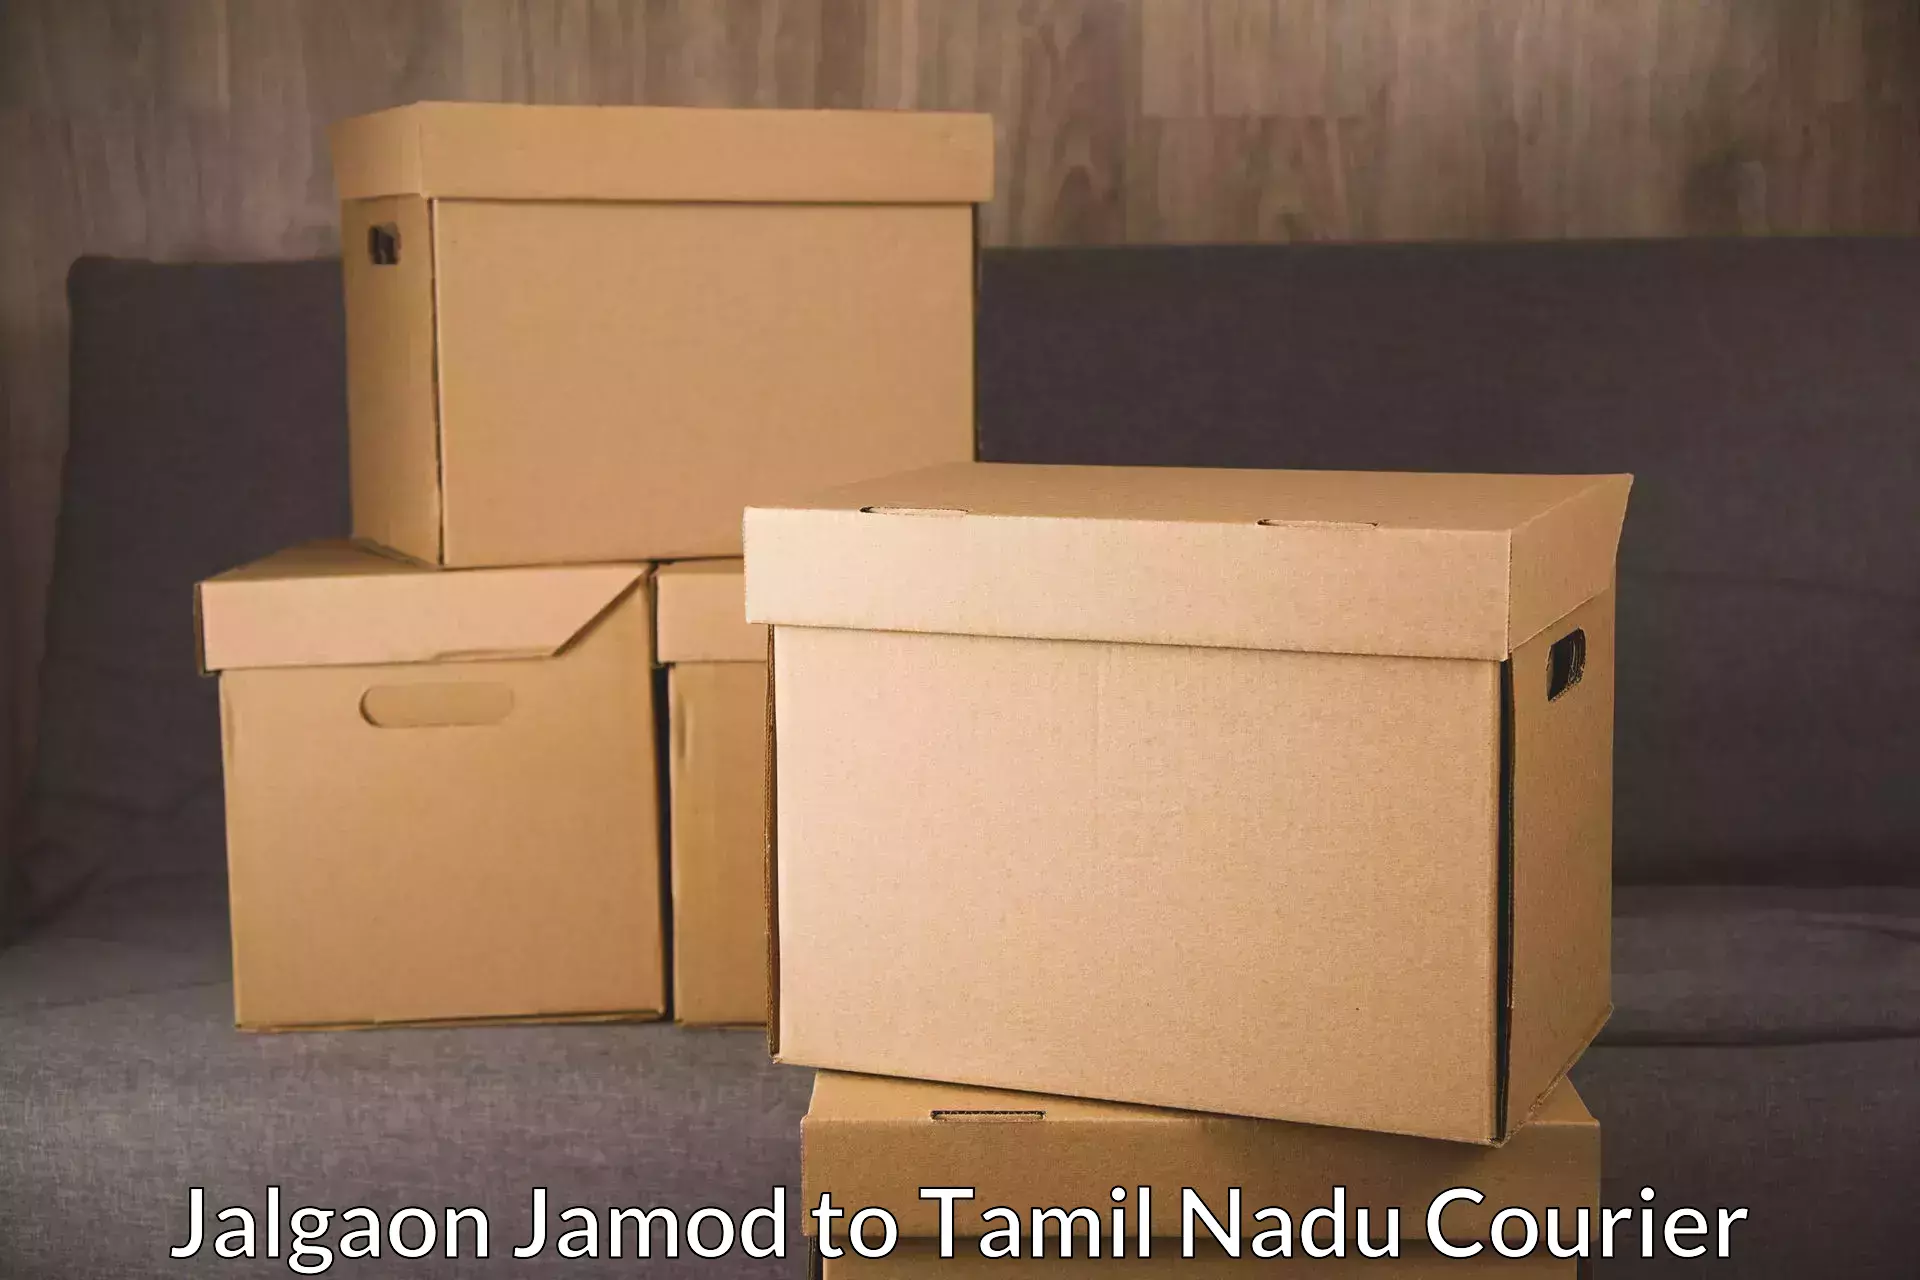 Residential courier service Jalgaon Jamod to Vriddhachalam